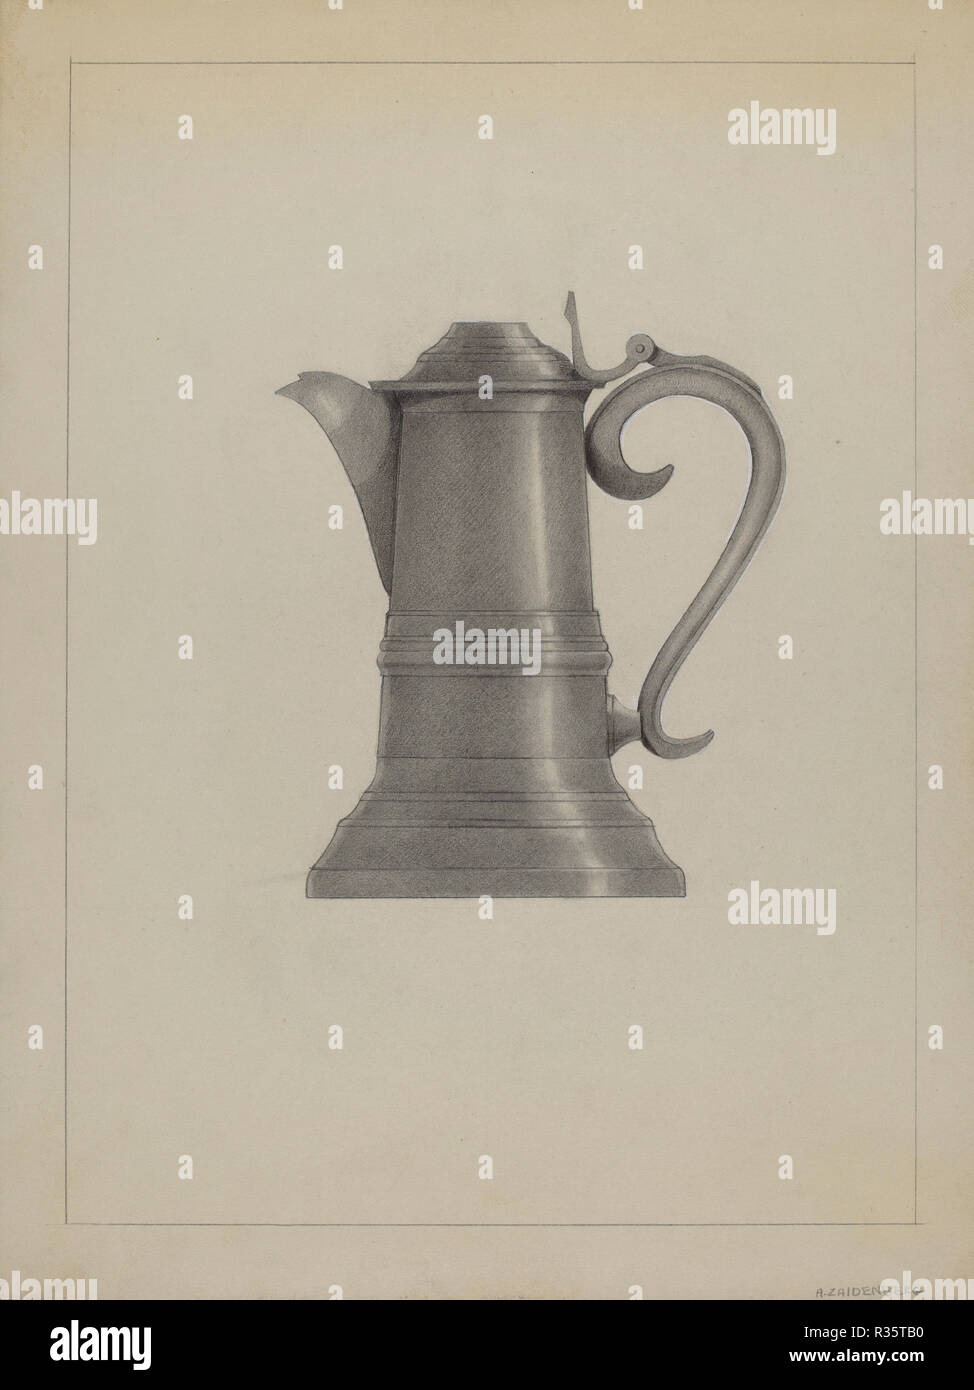 Pewter Flagon. Dated: c. 1936. Dimensions: overall: 28.6 x 21.6 cm (11 1/4 x 8 1/2 in.)  Original IAD Object: 10 1/4' high. Medium: graphite on paperboard. Museum: National Gallery of Art, Washington DC. Author: A. Zaidenberg. Stock Photo